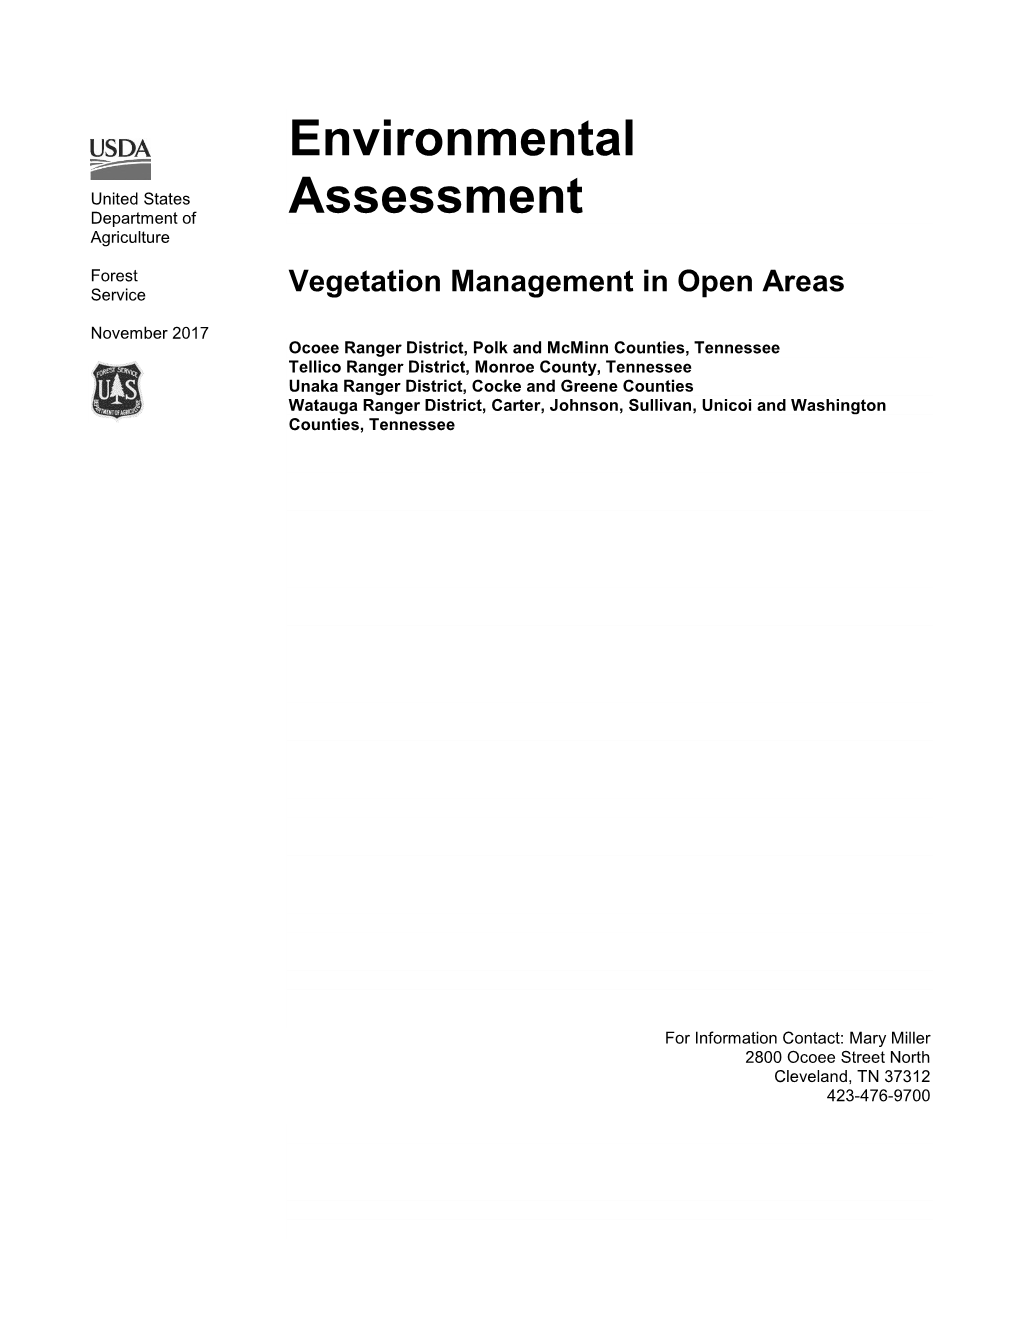 Environmental Assessment Is Recorded in a Decision Notice